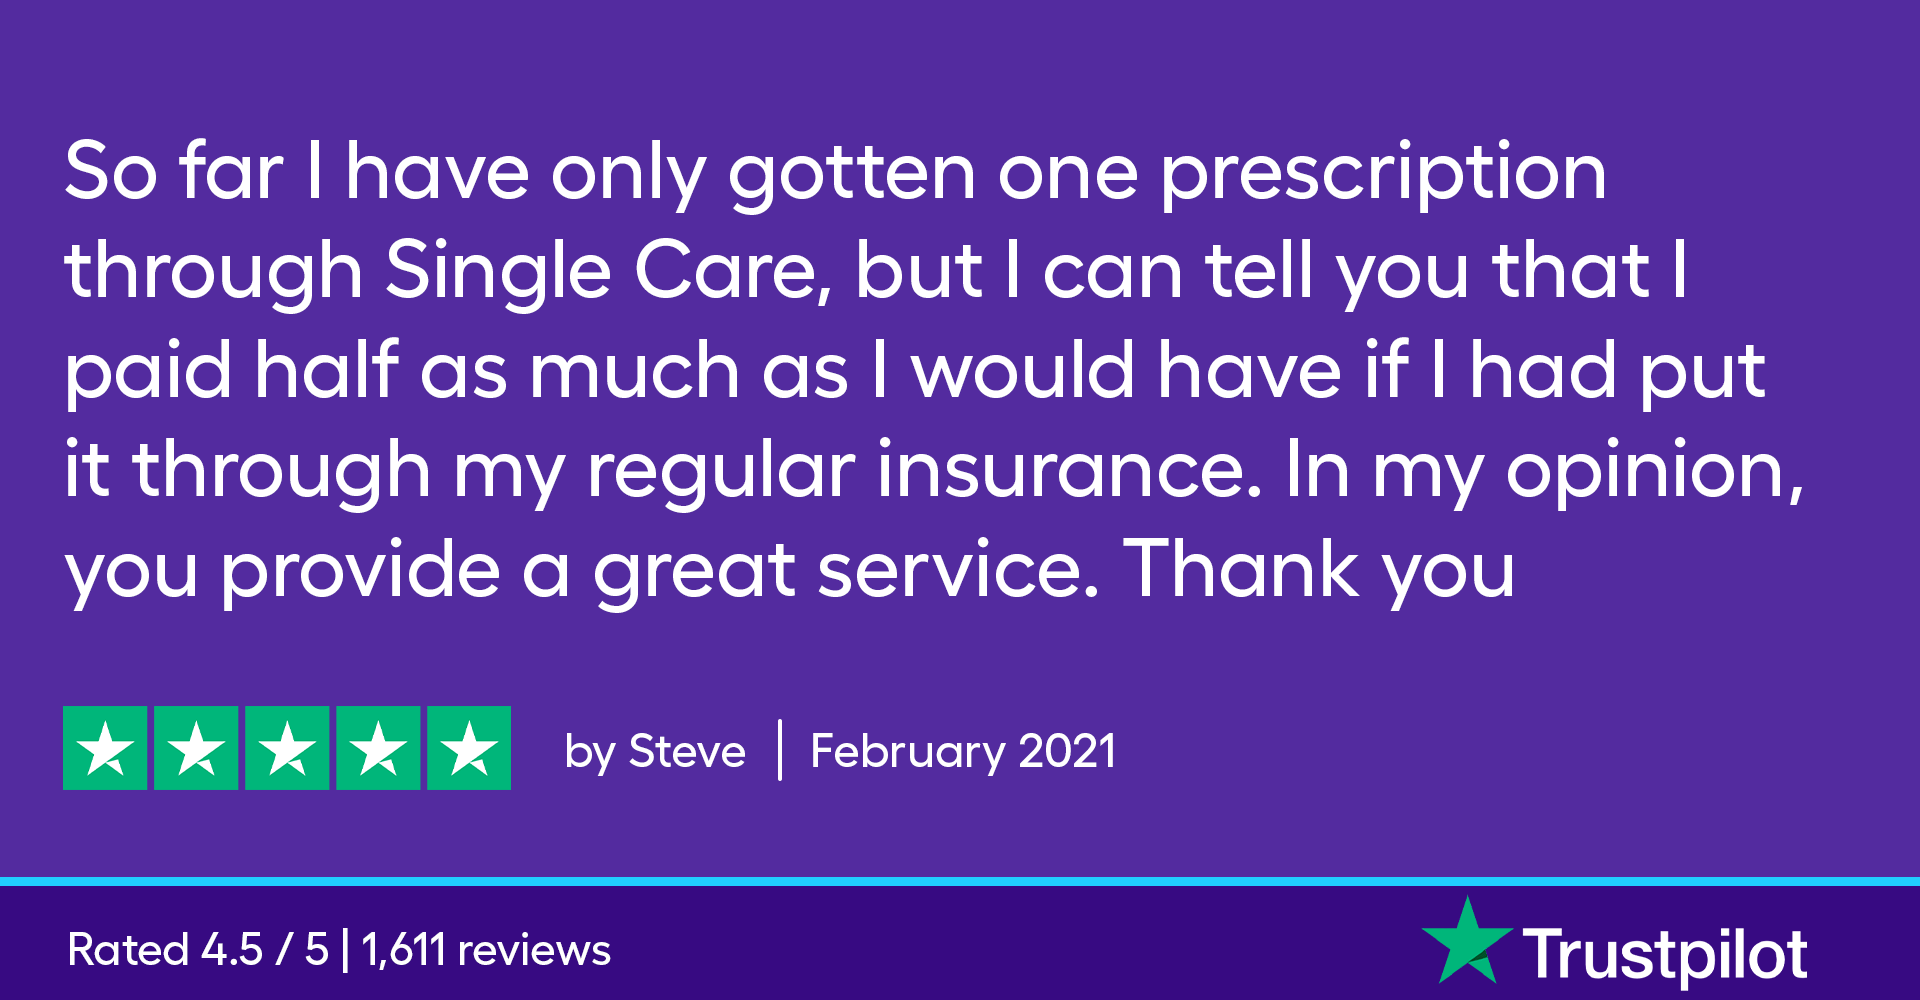 So far I have only gotten one prescription through SingleCare, but I can tell you that I paid half as much as I would have if I had put it through my regular insurance. In my opinion, you provide a great service. Thank you!